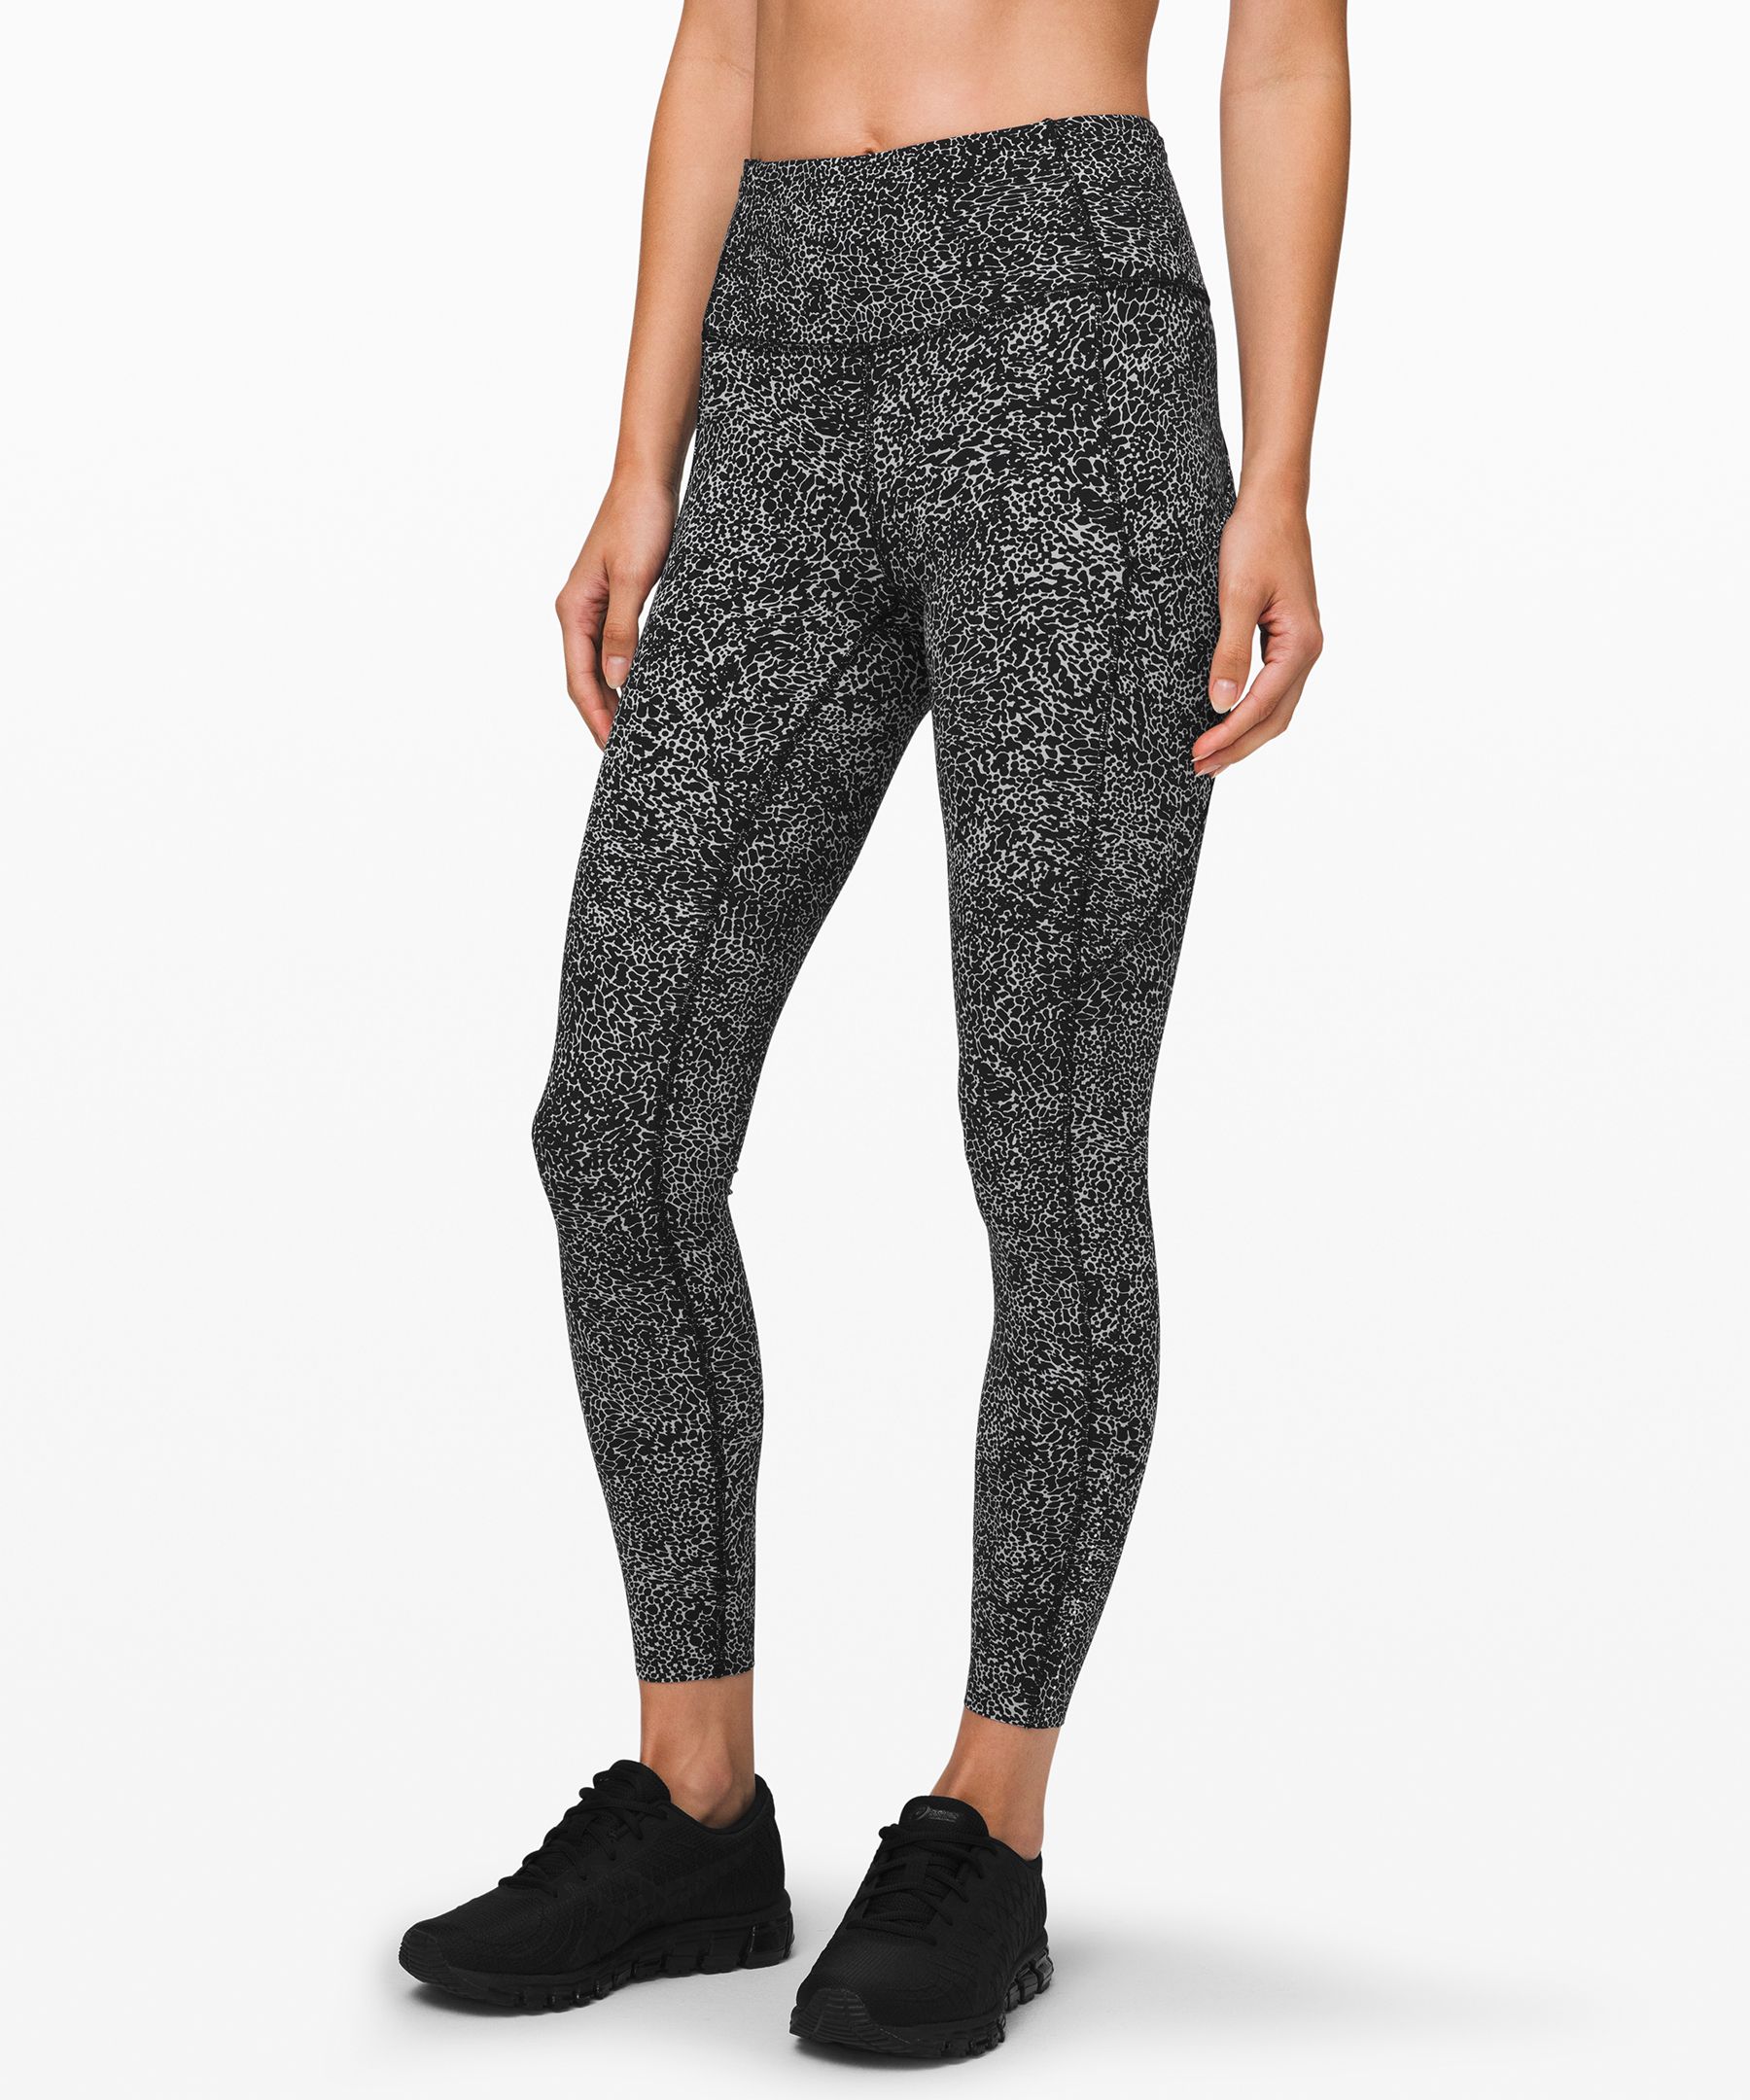 lululemon - Designed for run, powerfully supportive and available